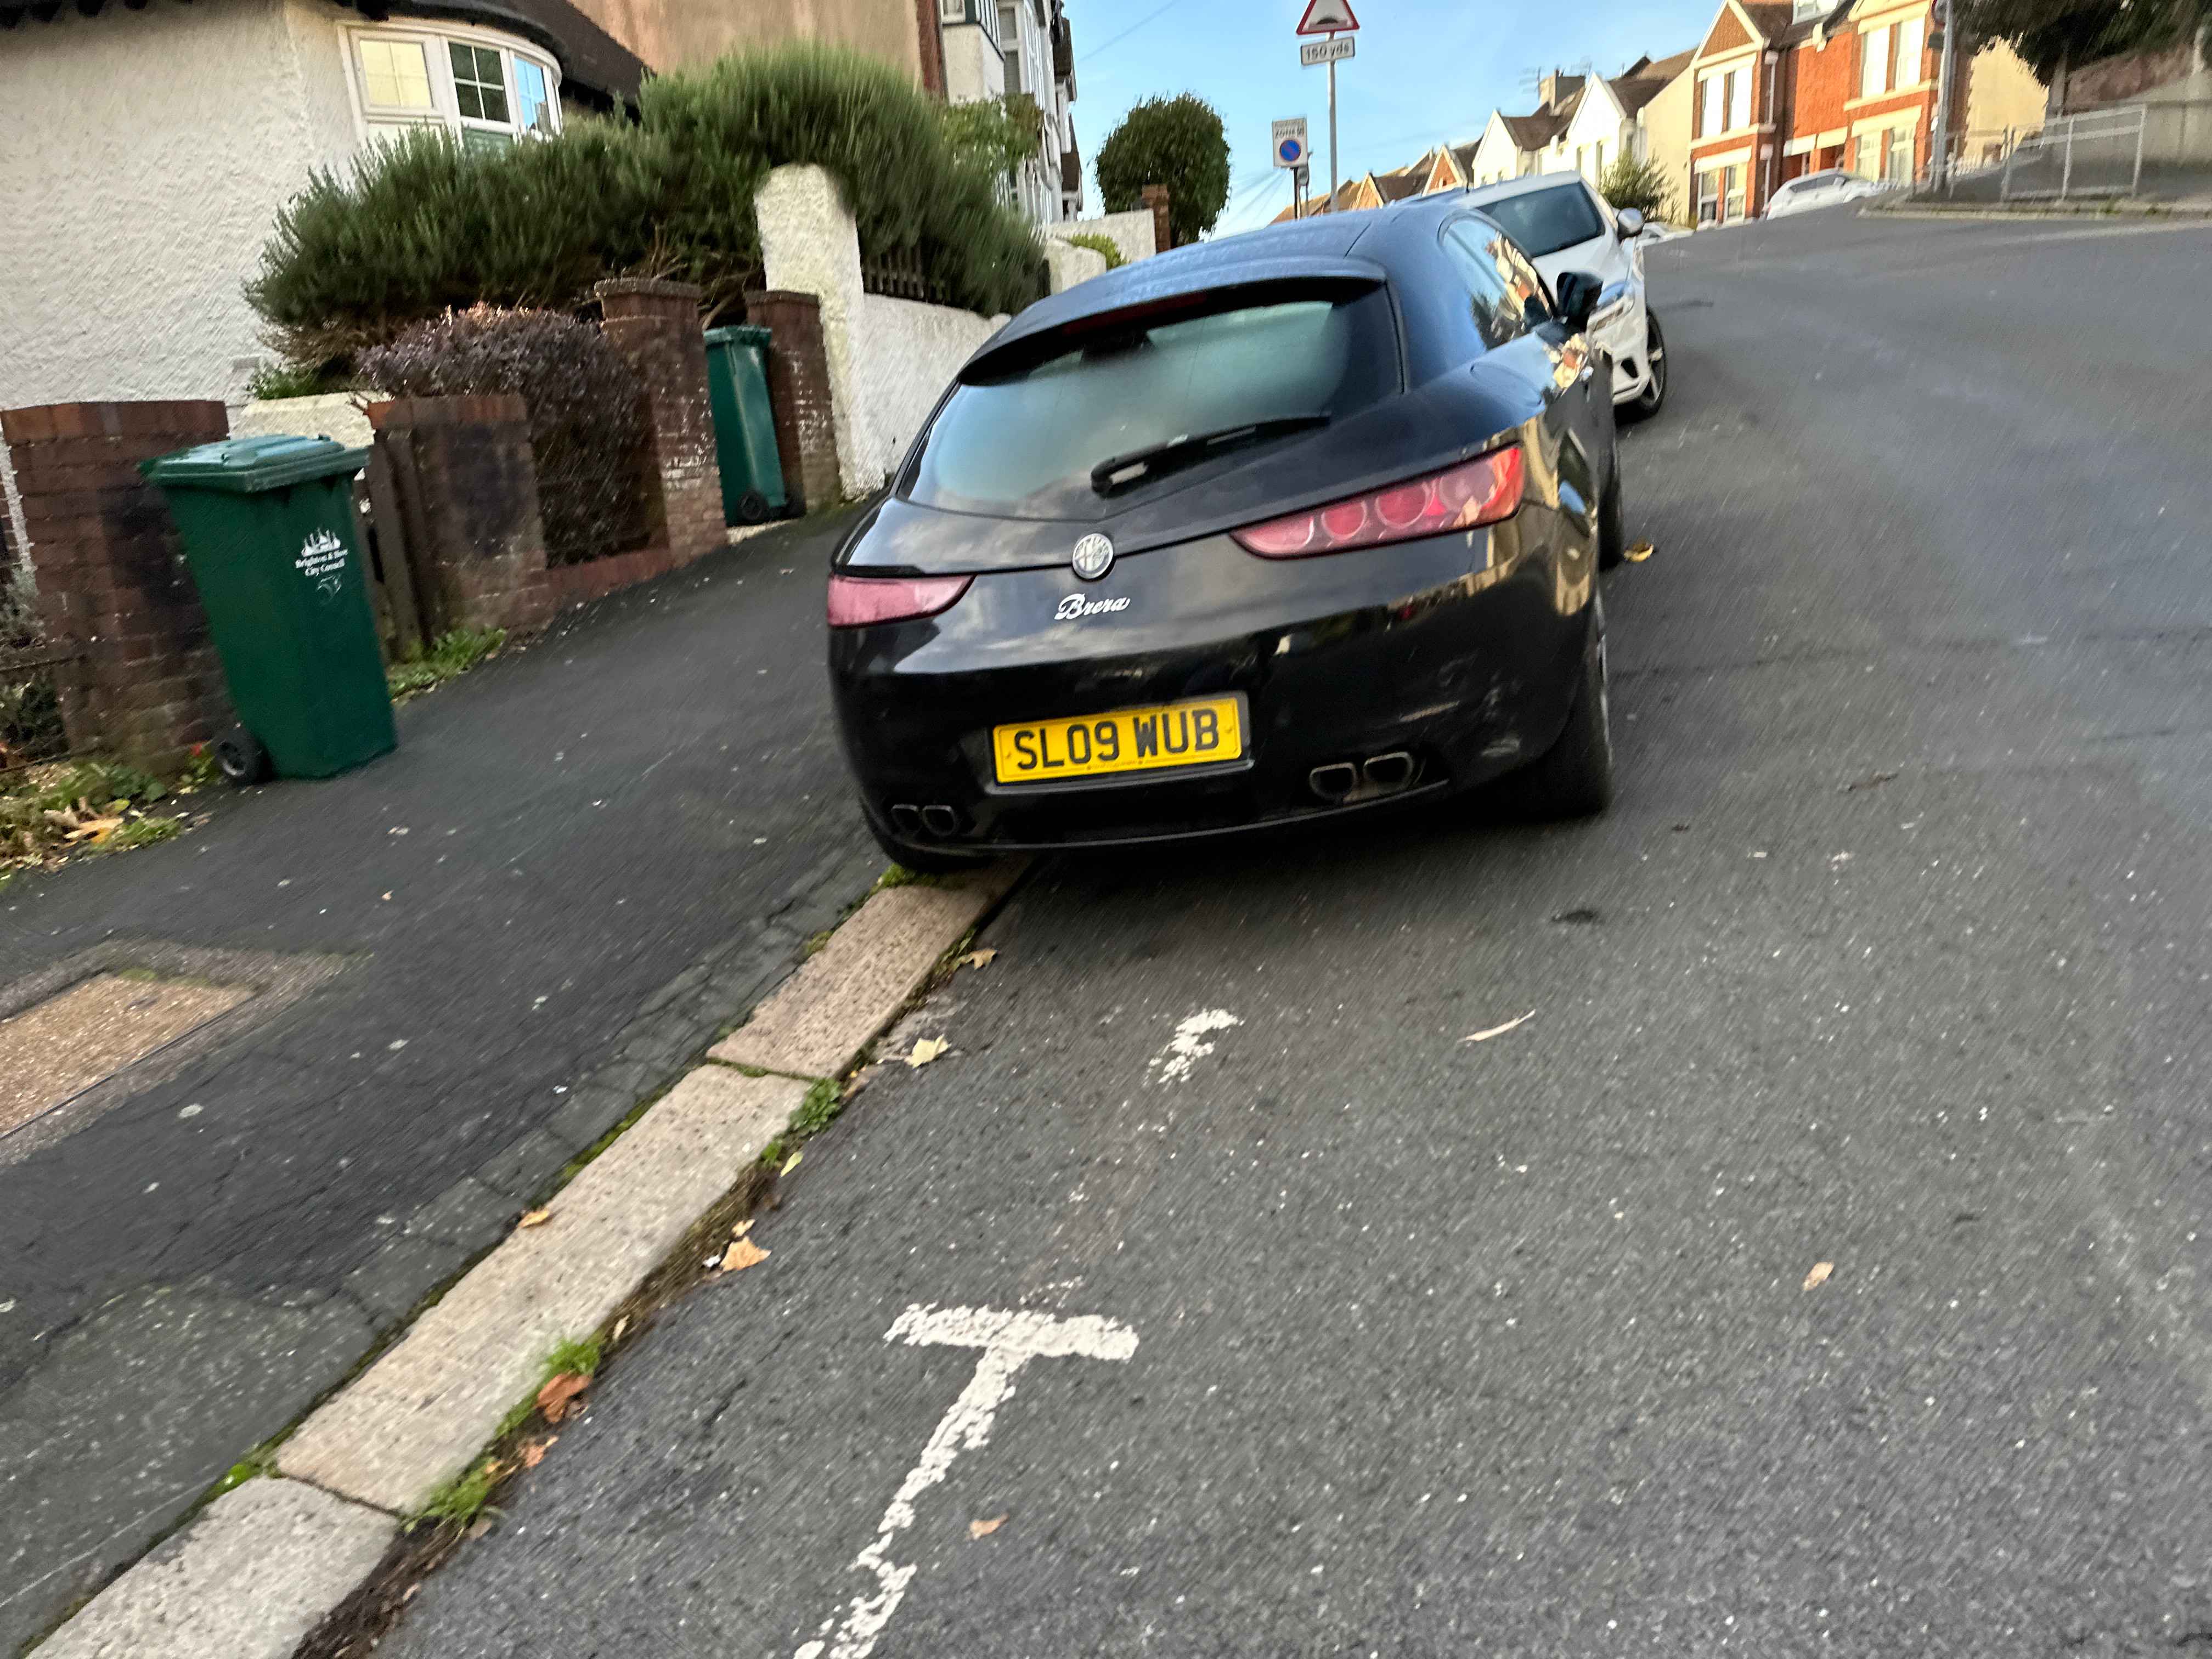 Photograph of SL09 WUB - a Black Alfa Romeo Brera parked in Hollingdean by a non-resident. The fourth of twenty photographs supplied by the residents of Hollingdean.